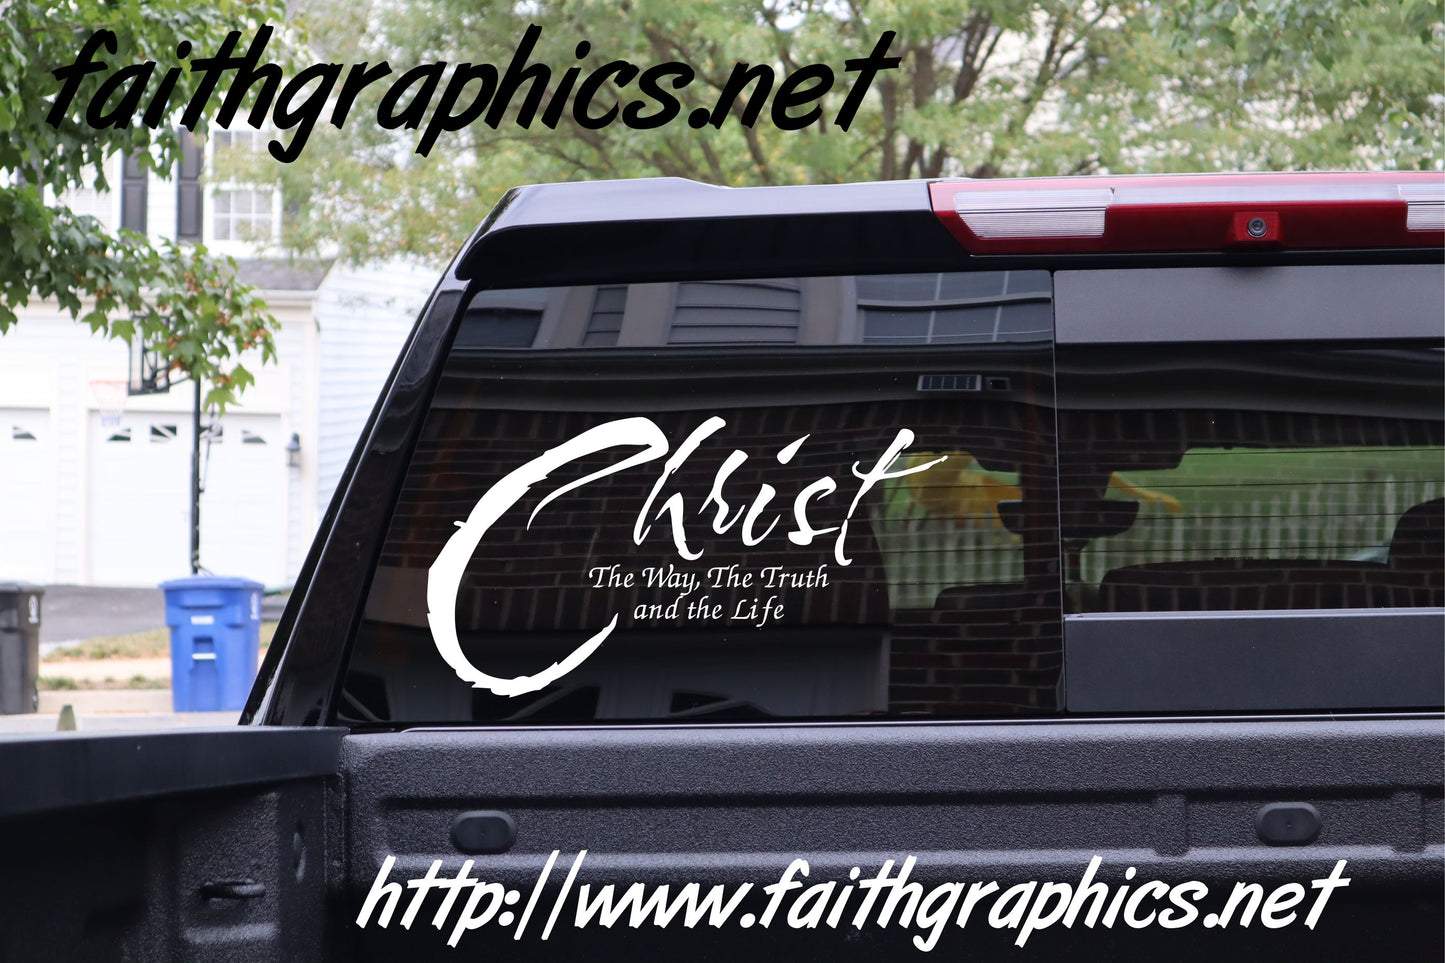 Christ the way the Truth Window/Hardhat Decal